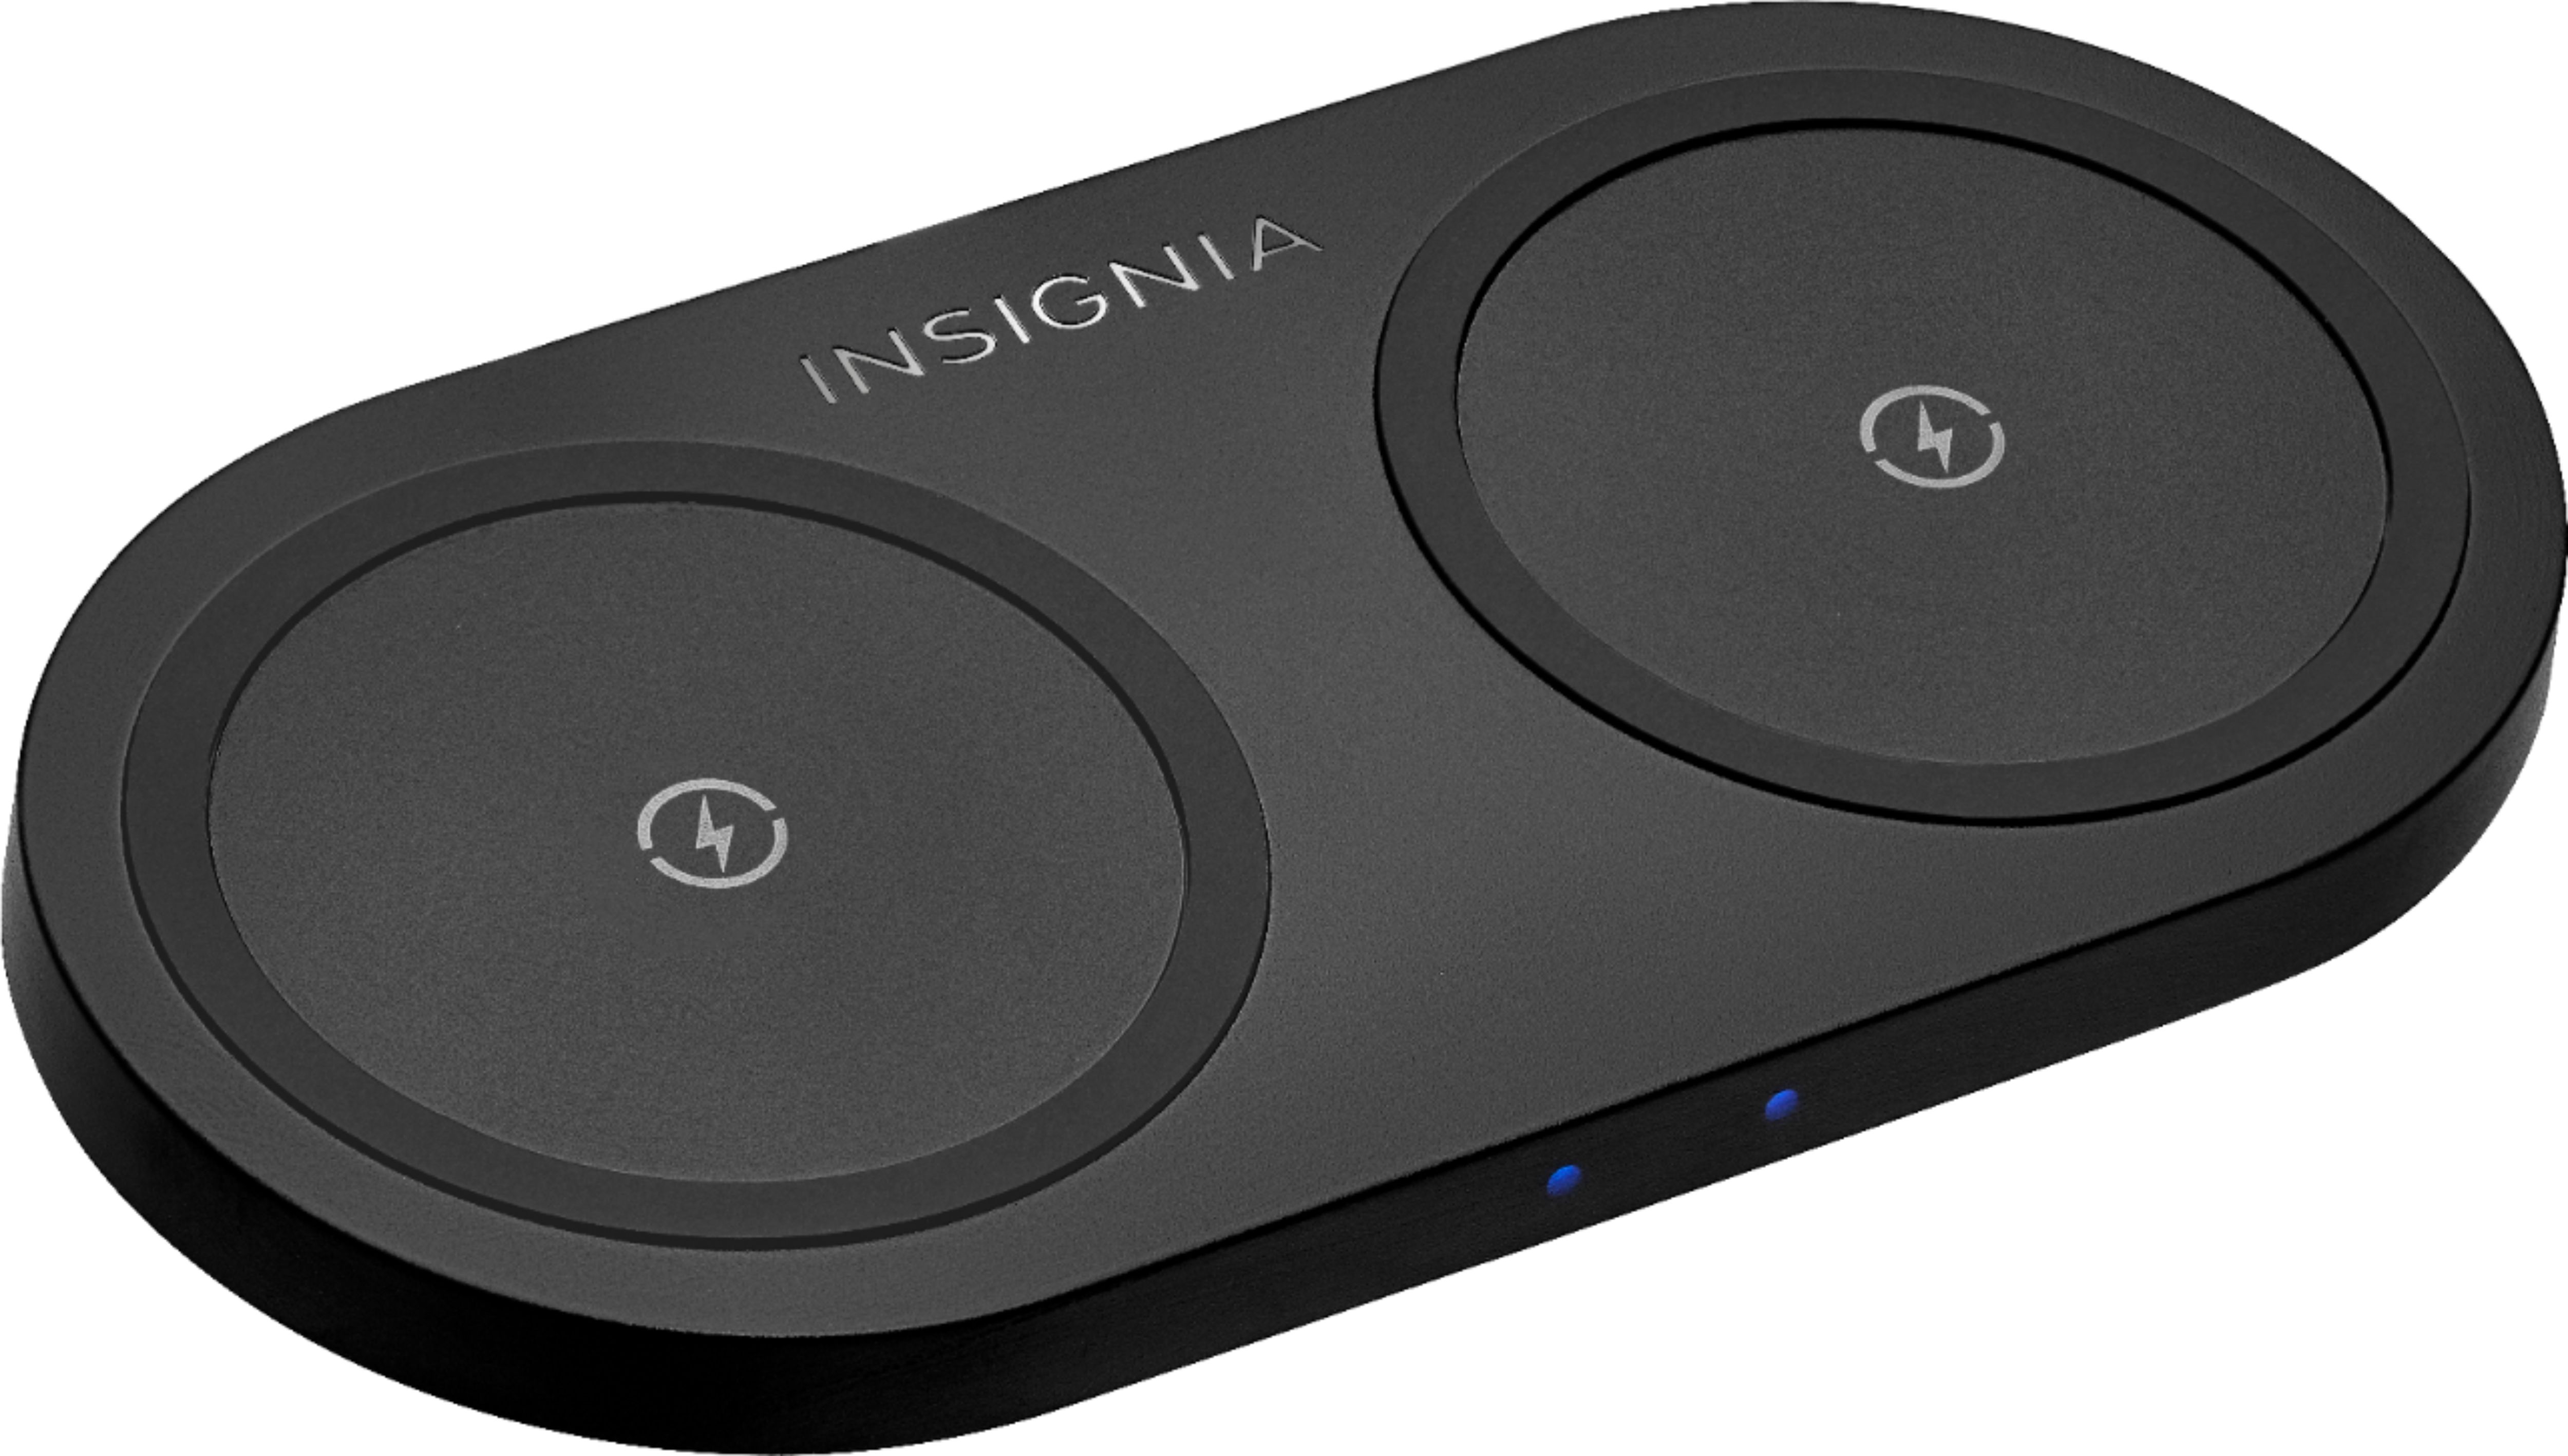 Insignia W Qi Certified Dual Wireless Charging Pad For Android Iphone Black Ns Mwpc10k2 Best Buy